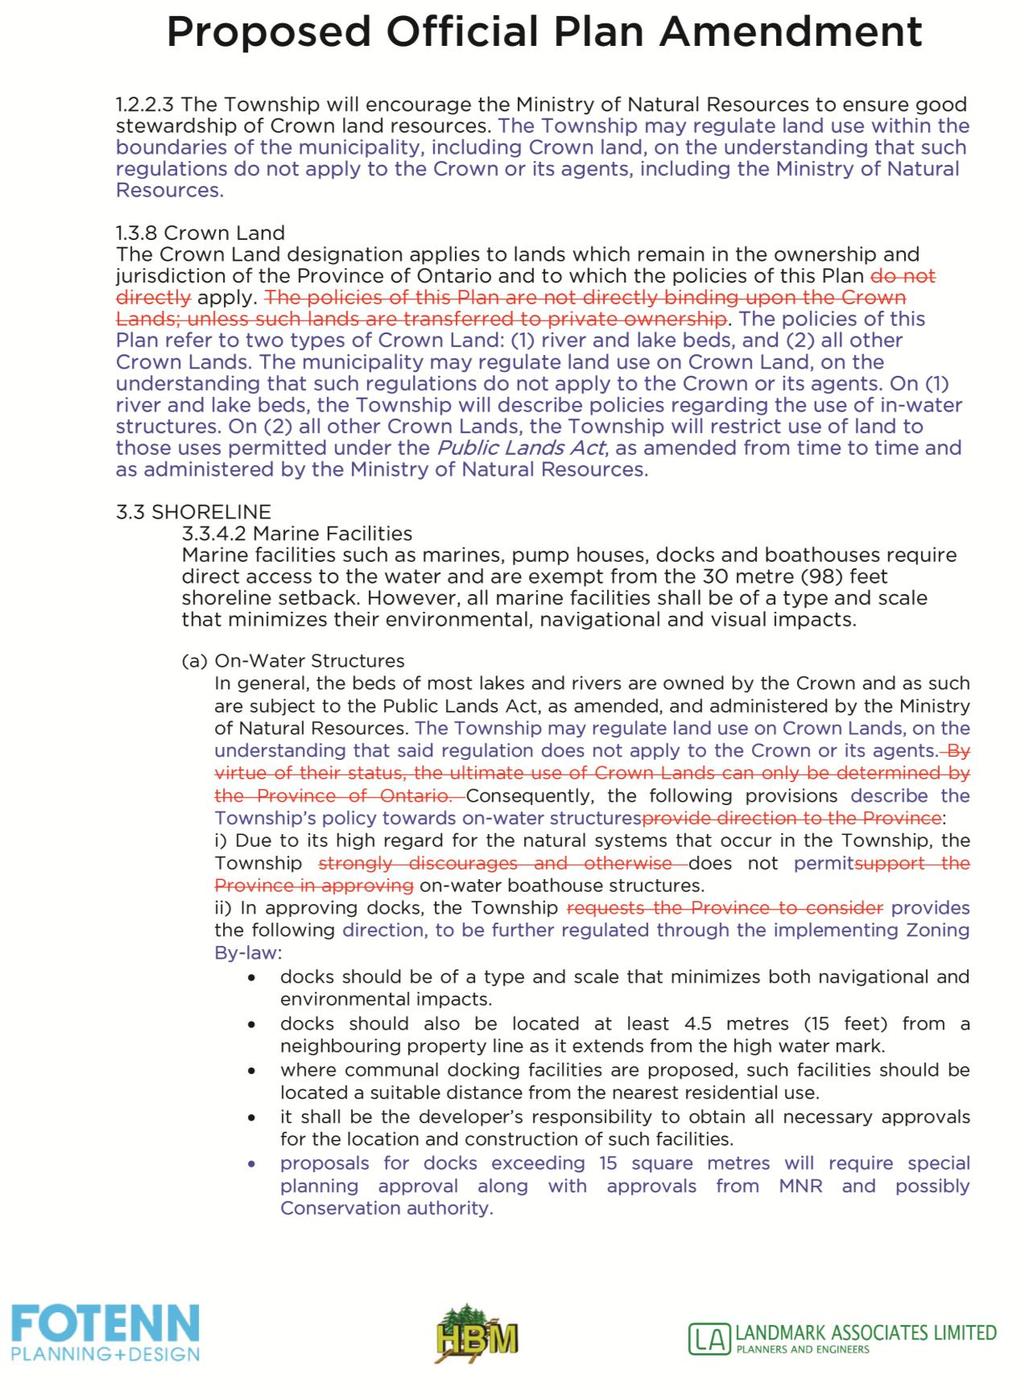 FIGURE 2: PROPOSED OFFICIAL PLAN AMENDMENT (1 of 2)